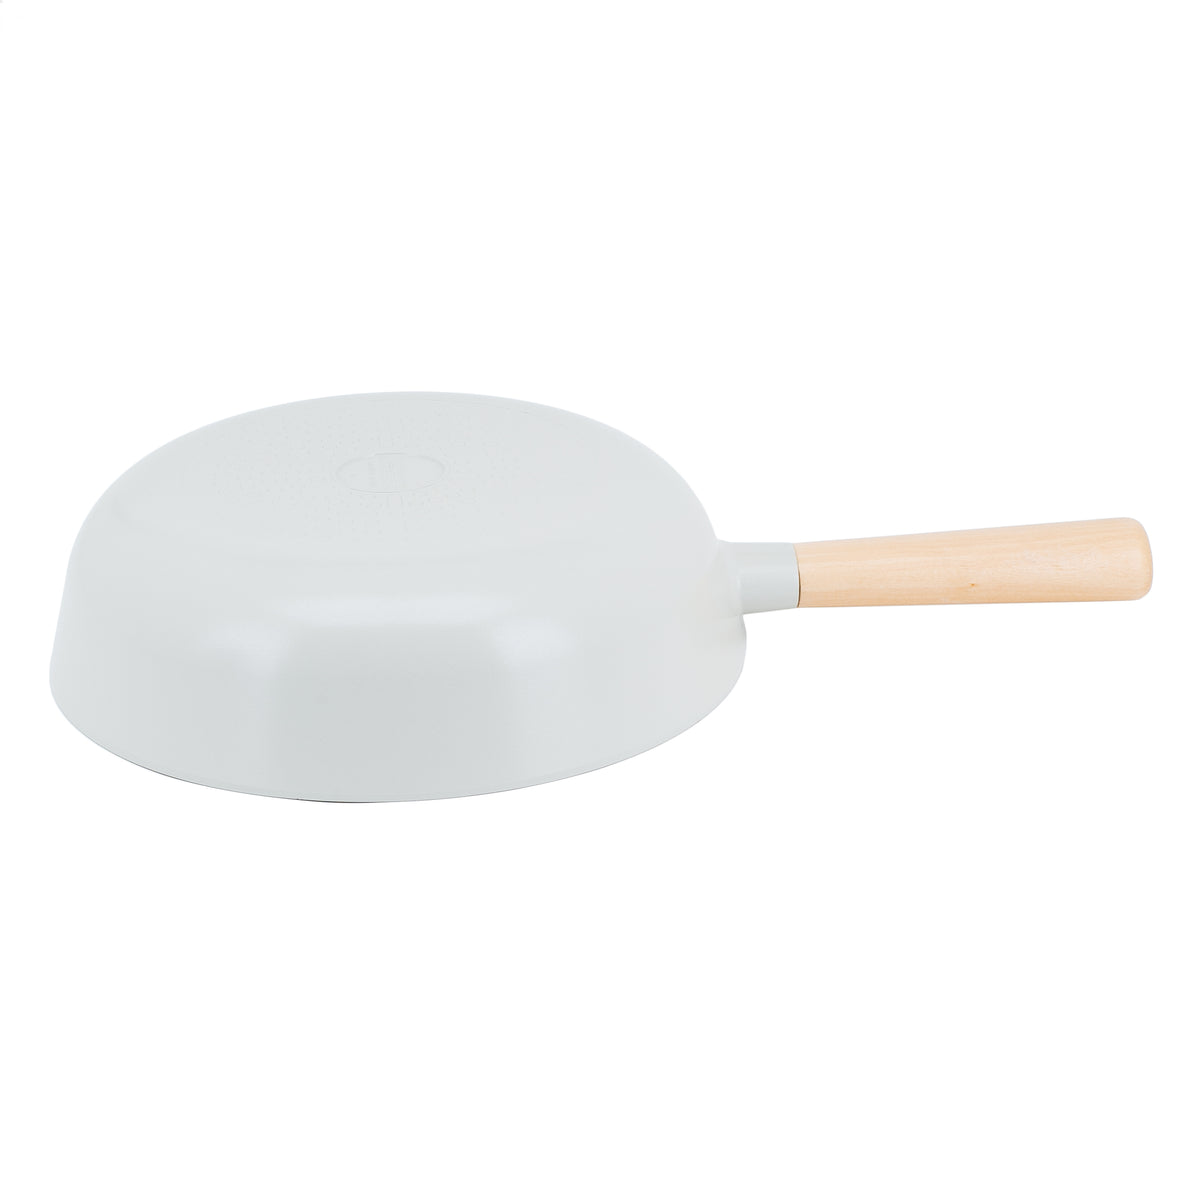 Neoflam Fika 24cm Fry pan Induction